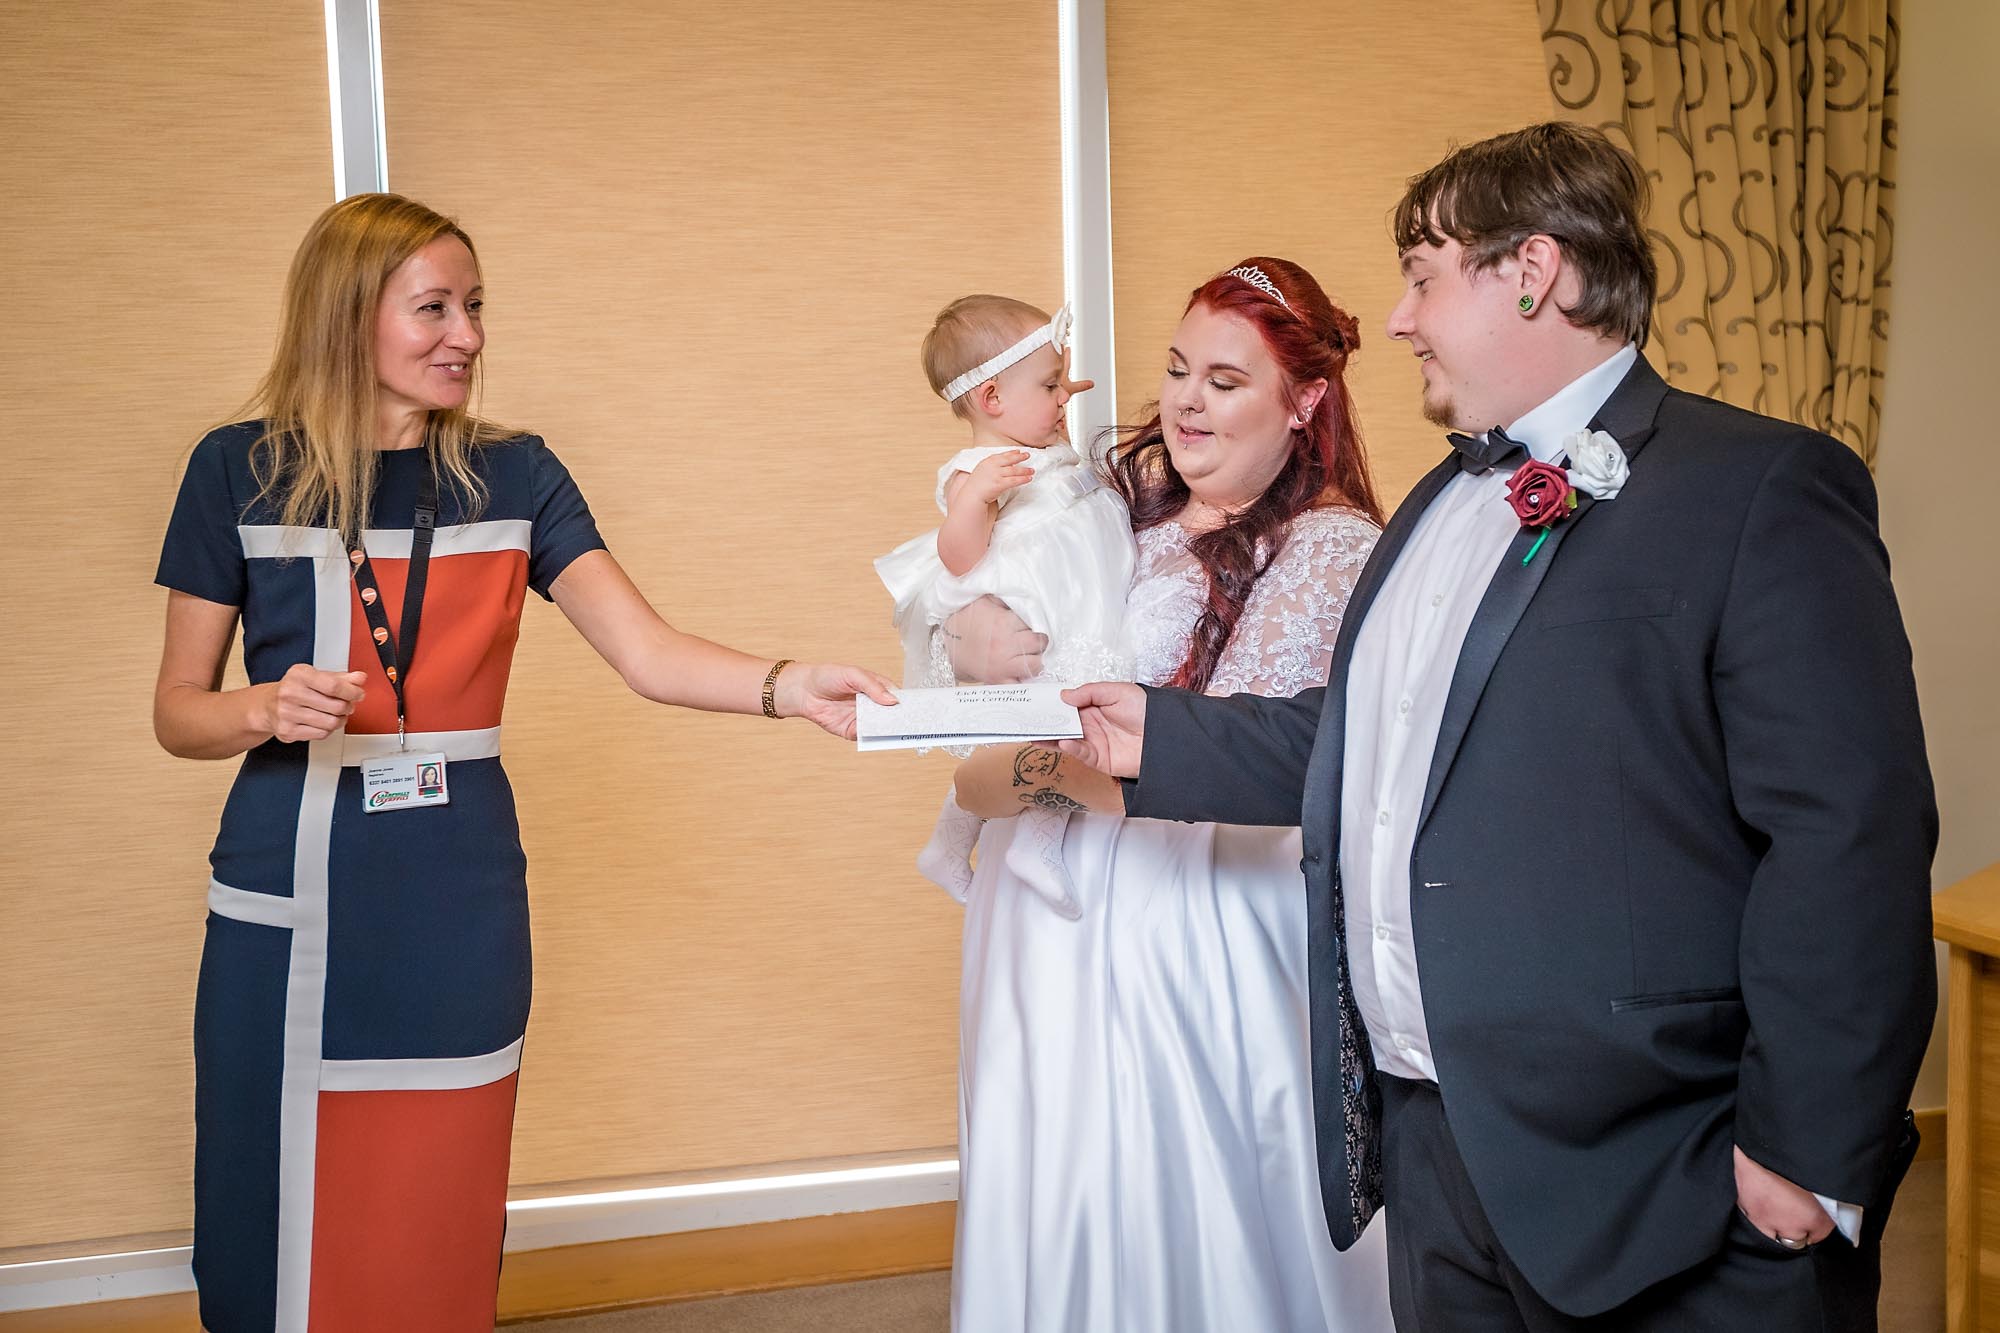 The registrar hands the Bride and Groom their wedding certificate at Penallta House